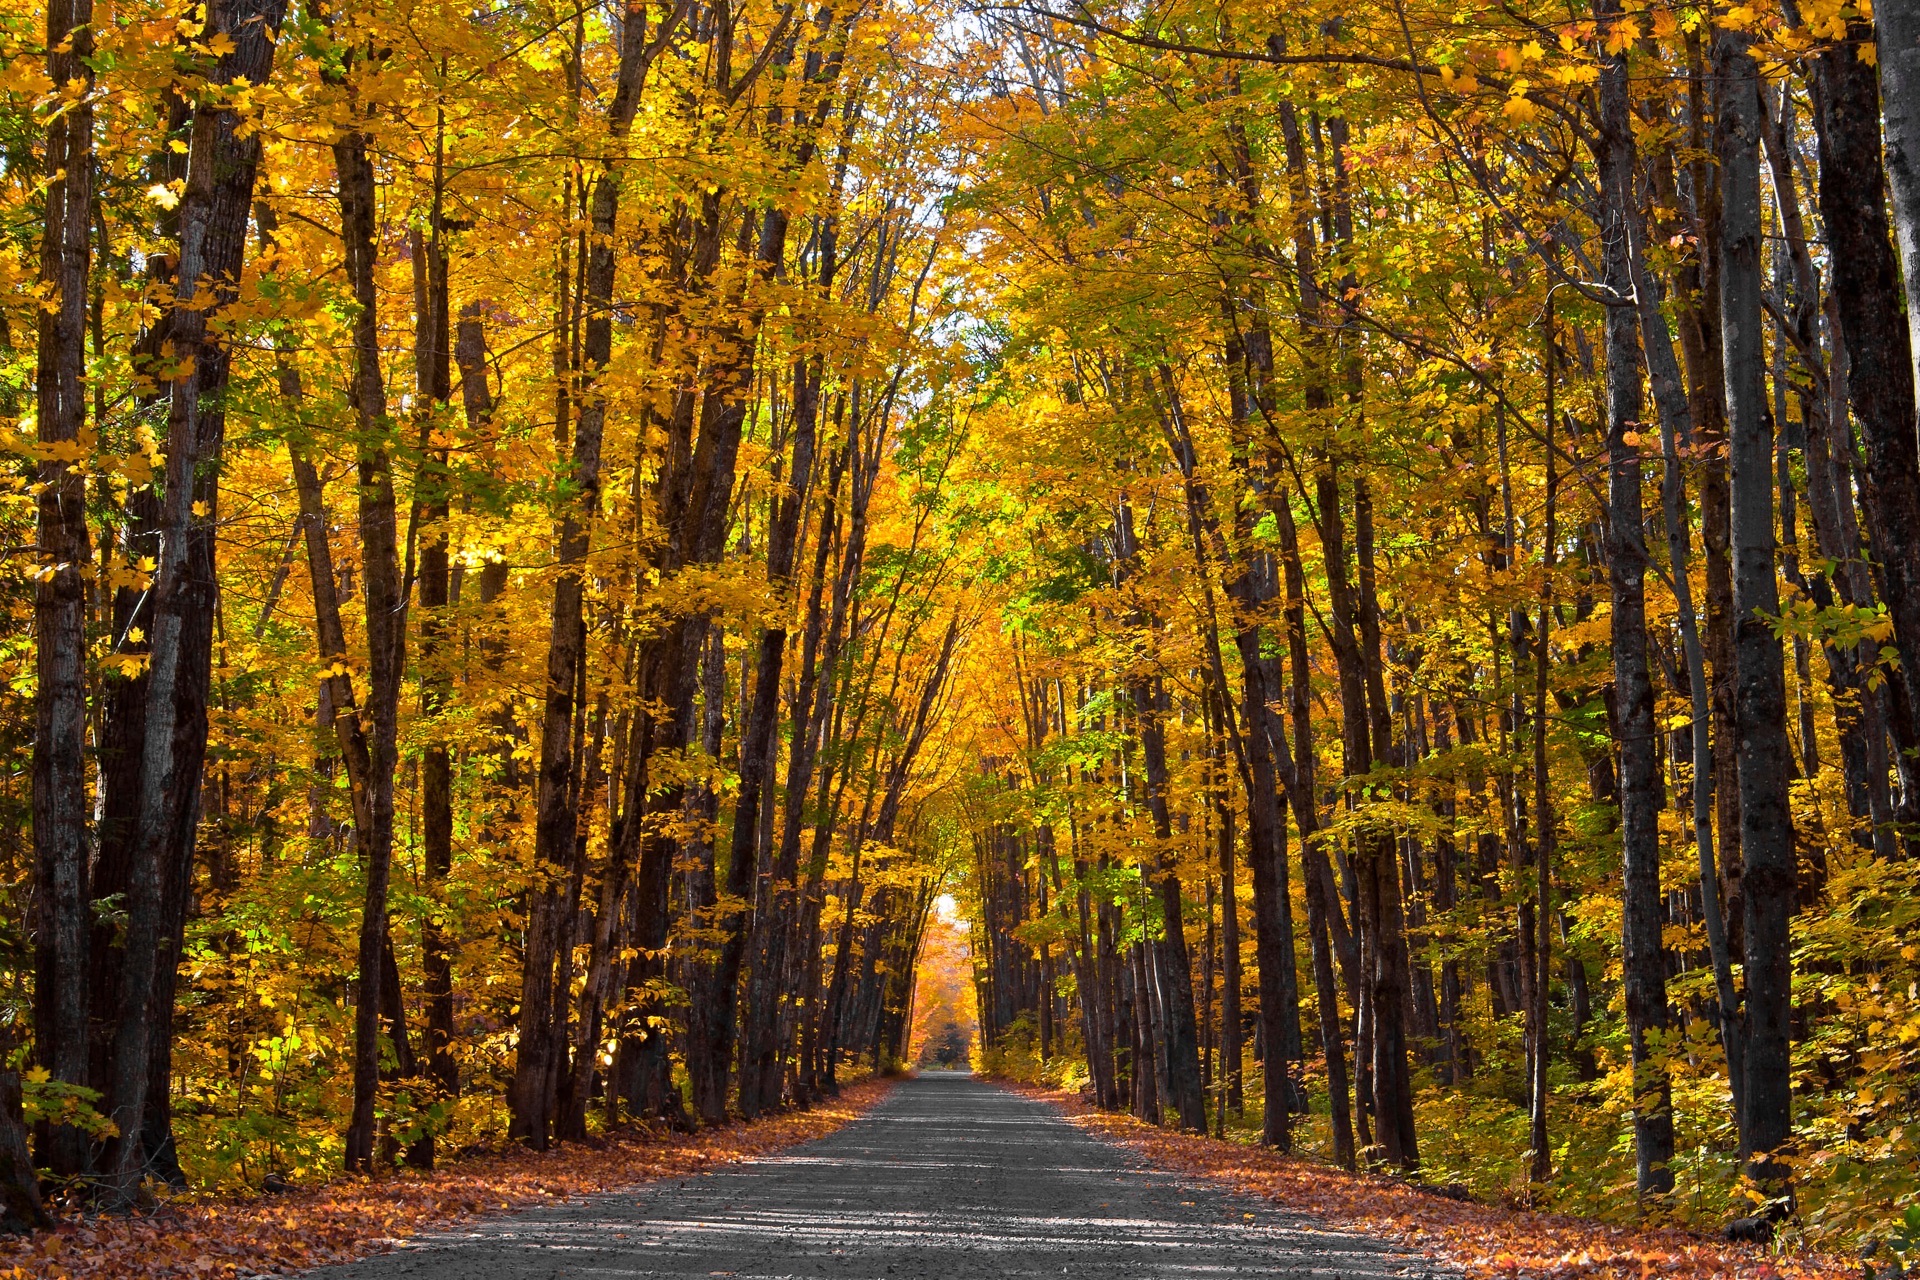 Two-lane road under a golden autumnal tree canopy